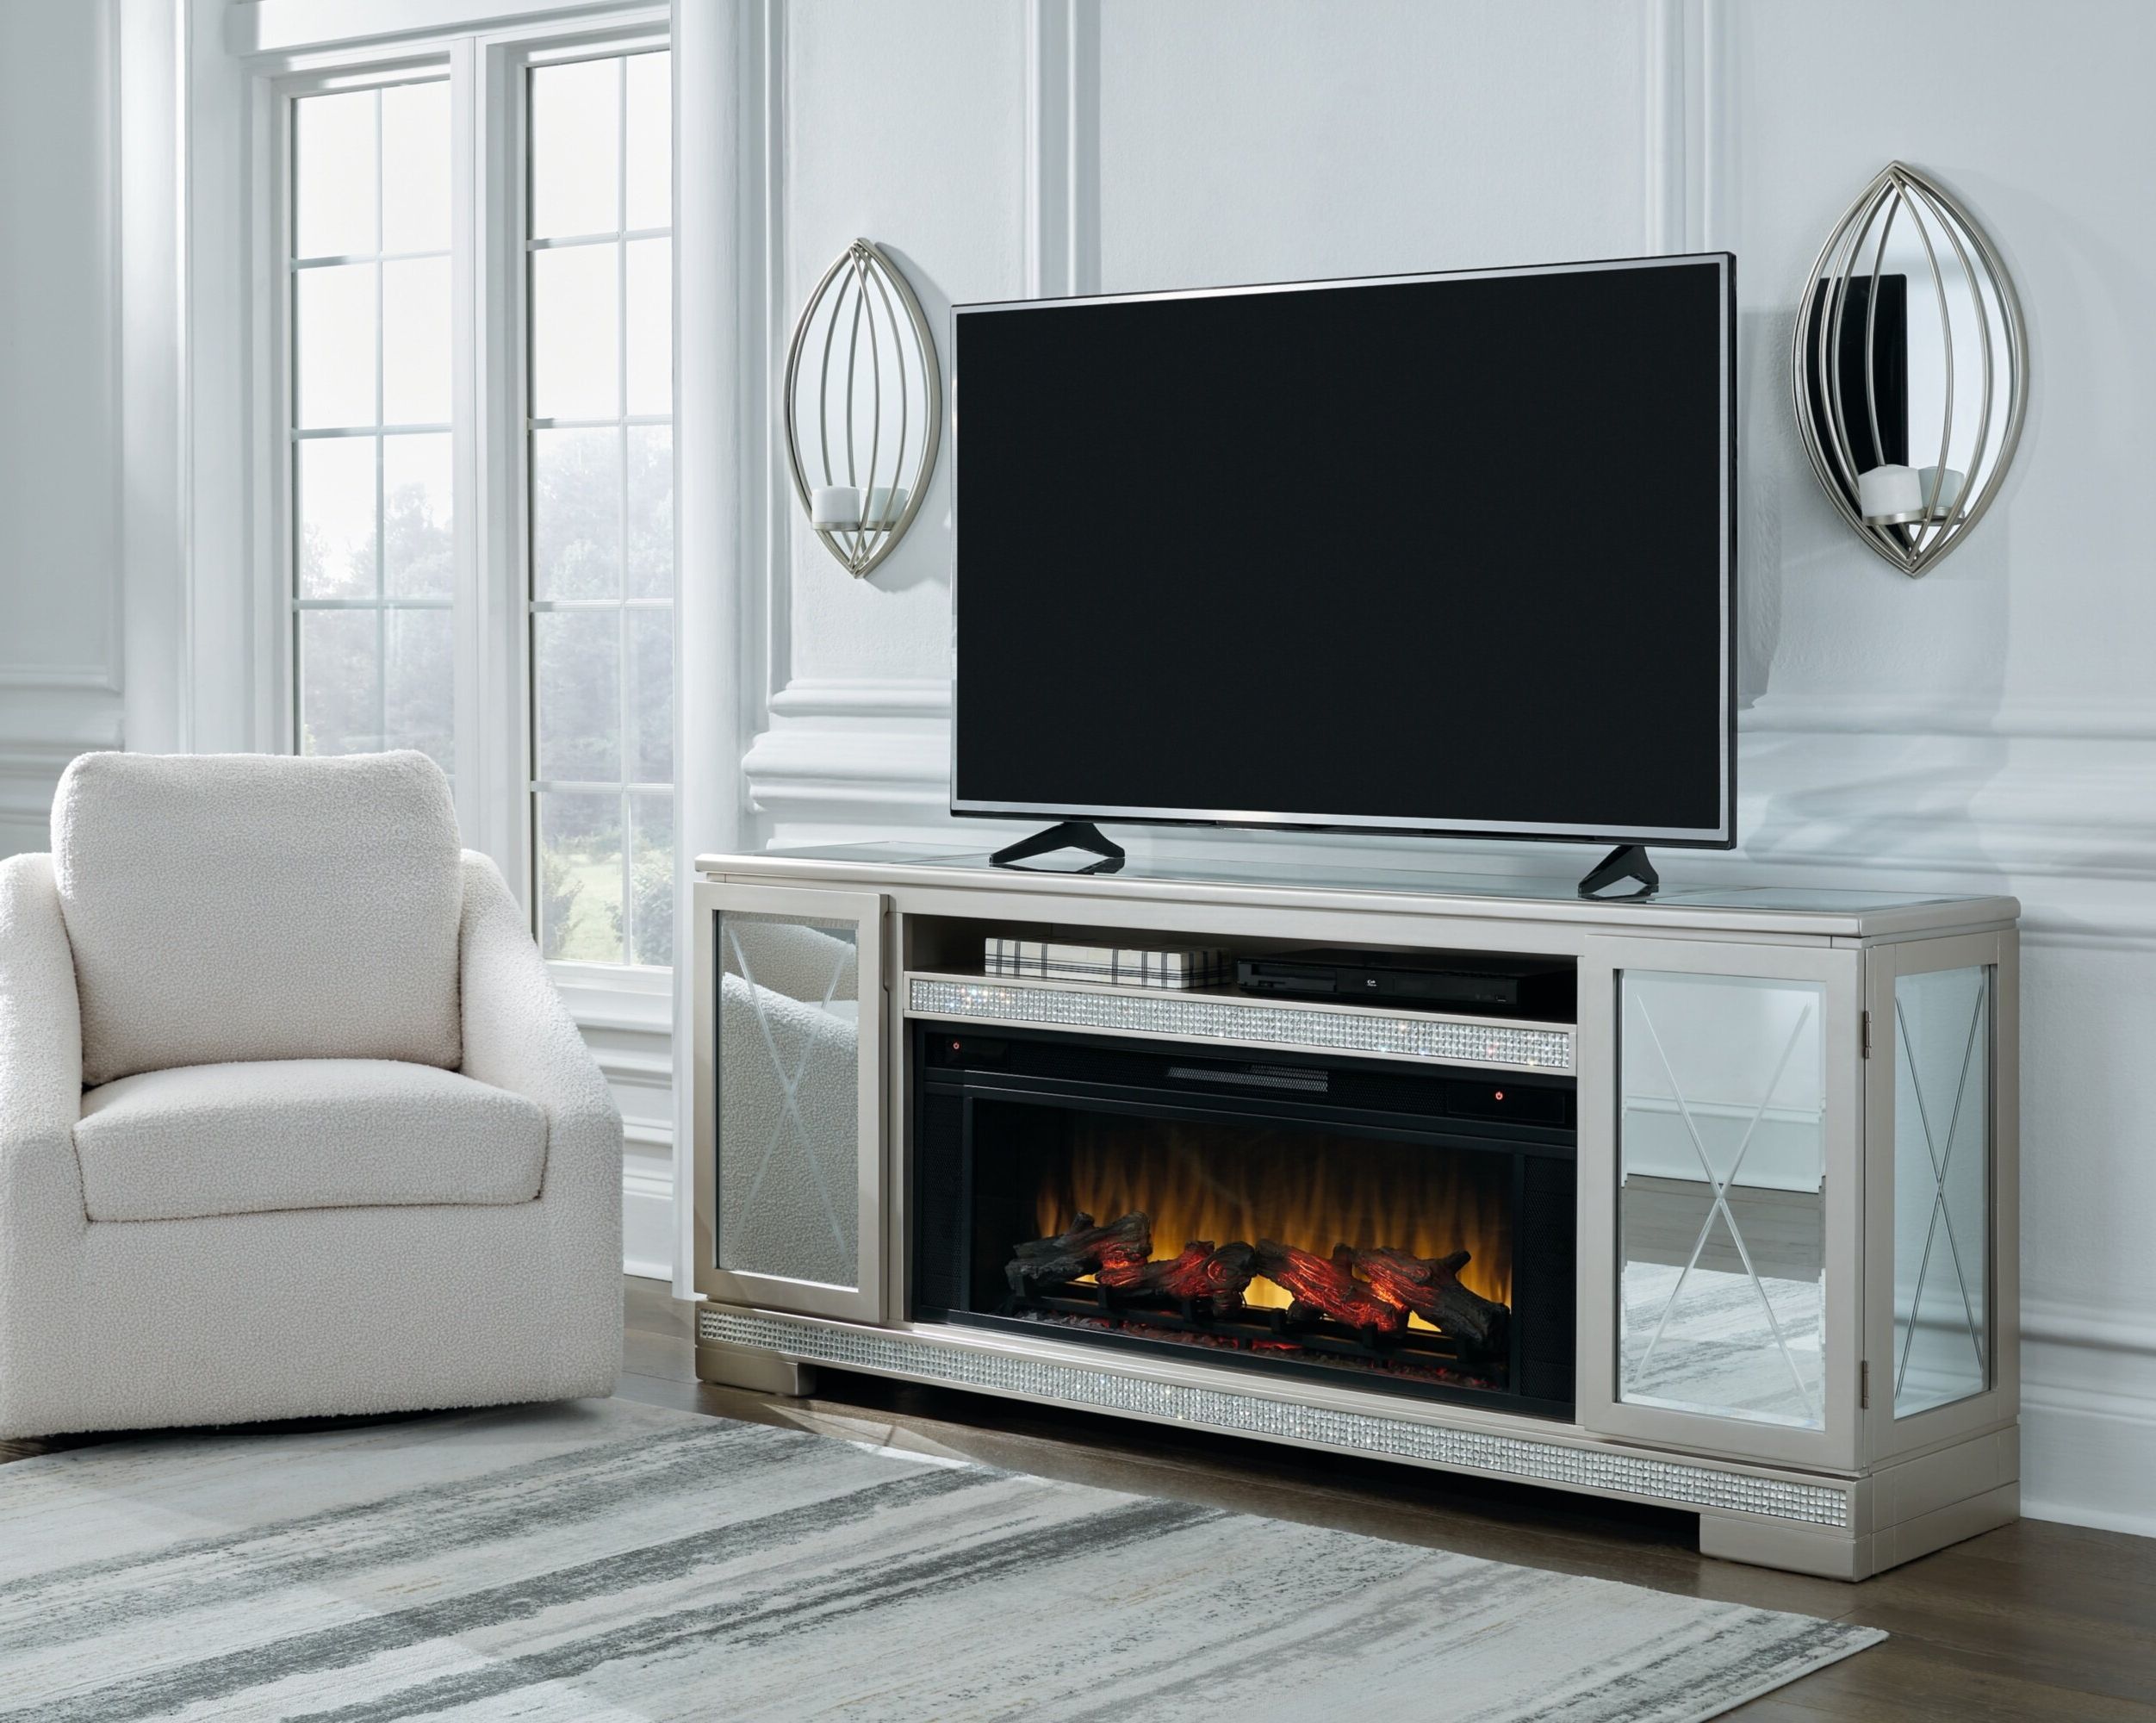 Signature Designashley Flamory Tv Stand For Tvs Up To 70" With Electric  Fireplace Included | Wayfair Within Electric Fireplace Tv Stands (View 16 of 20)